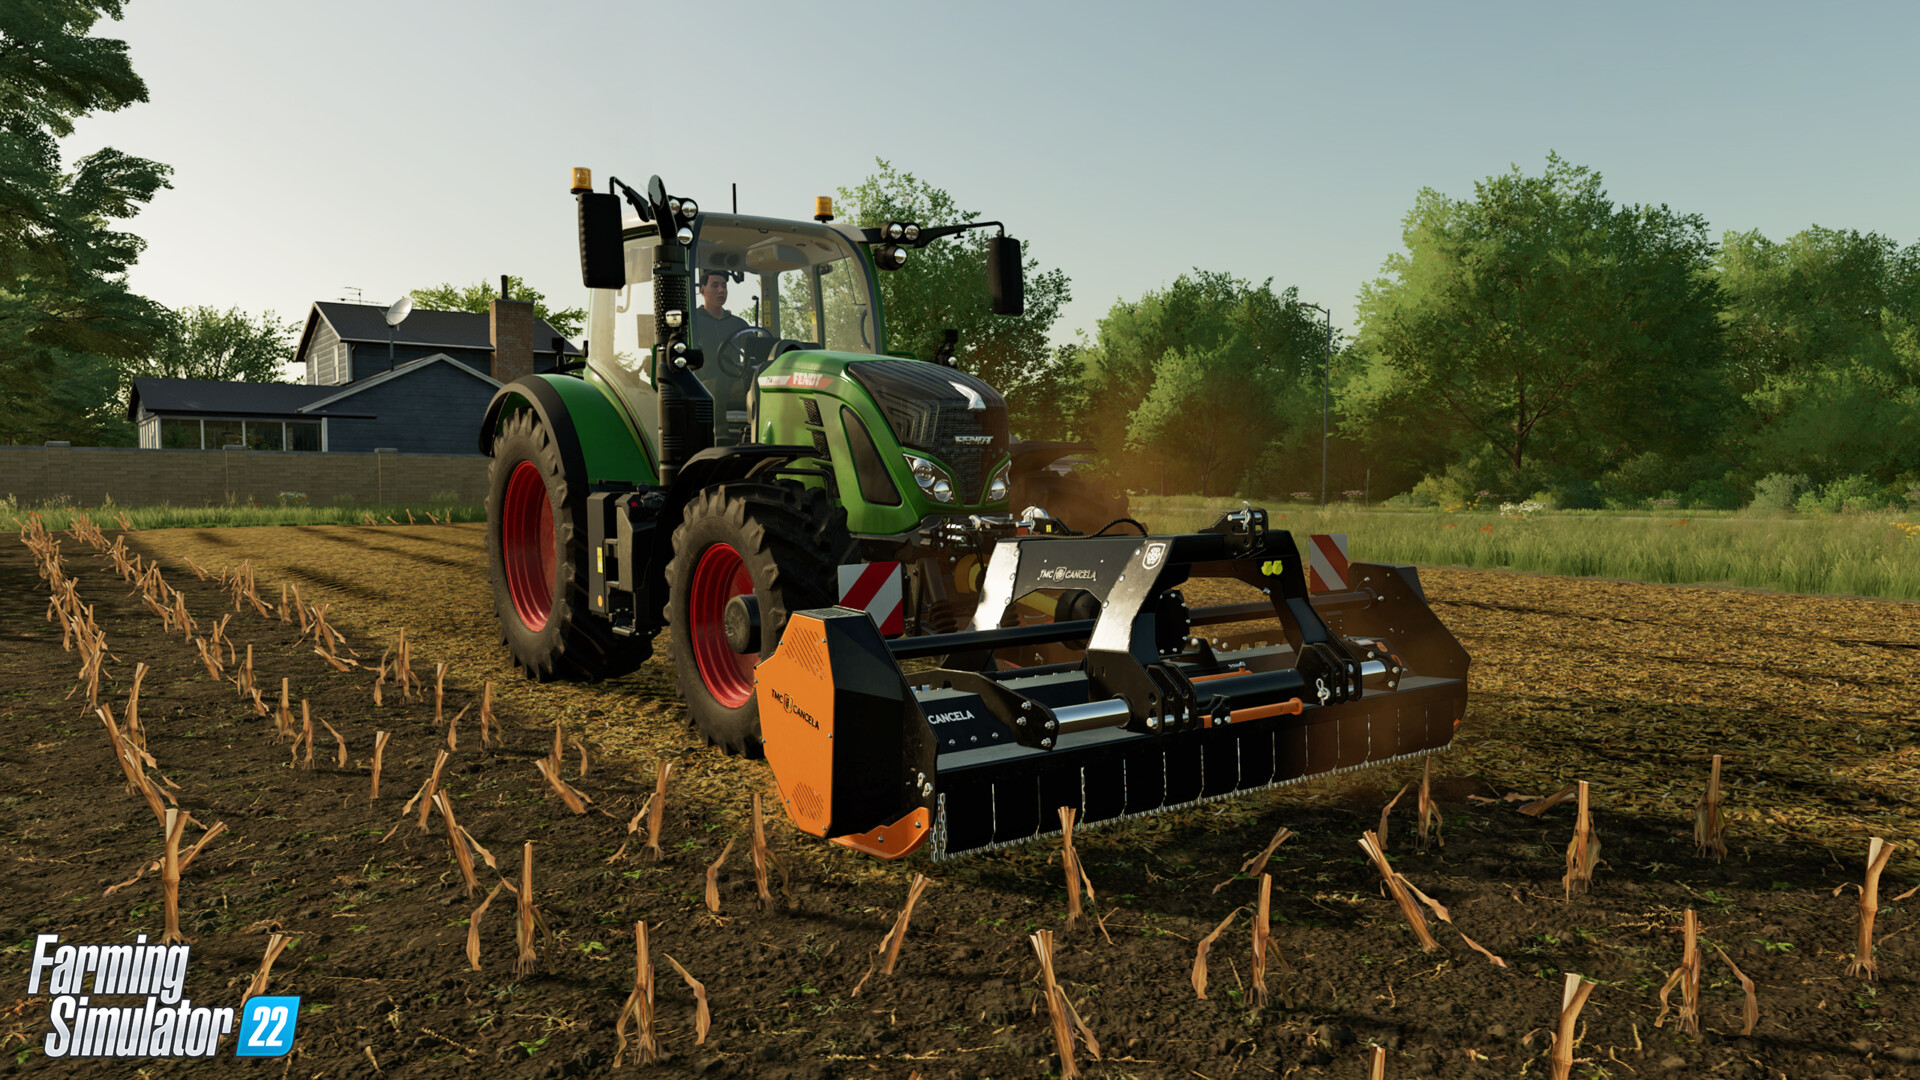 Farming Simulator 22 will have Nvidia DLSS support at launch